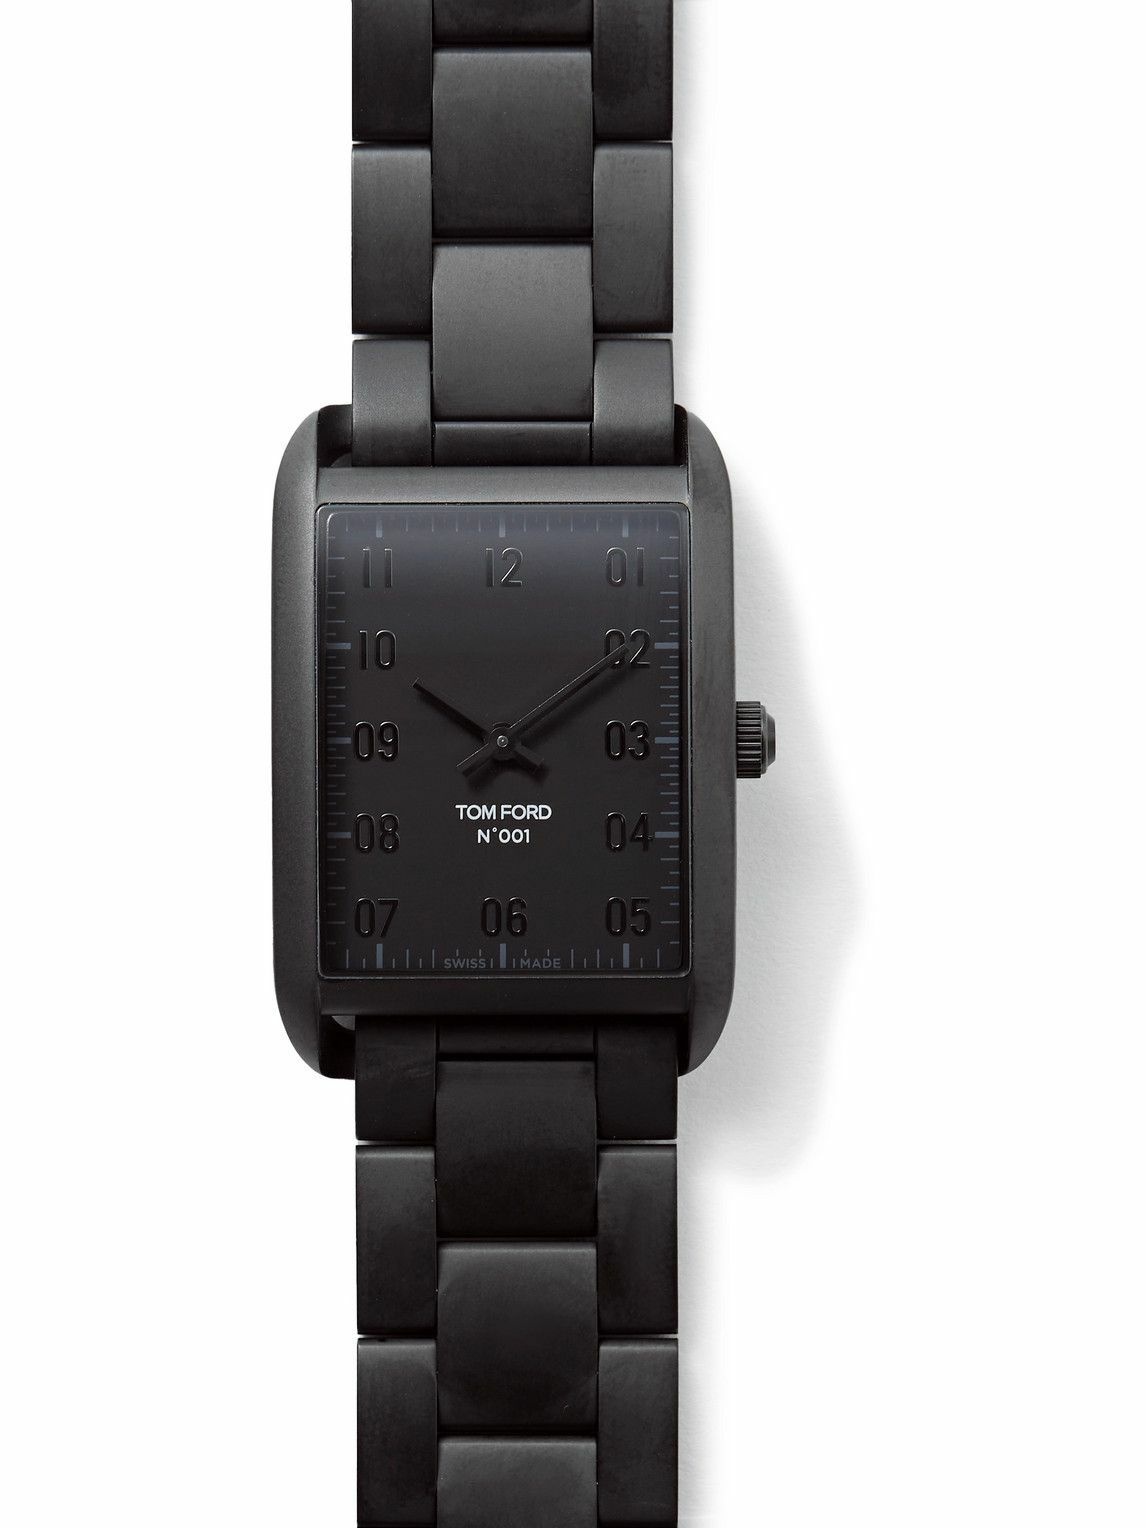 Photo: TOM FORD Timepieces - 001 DLC-Coated Stainless Steel Watch